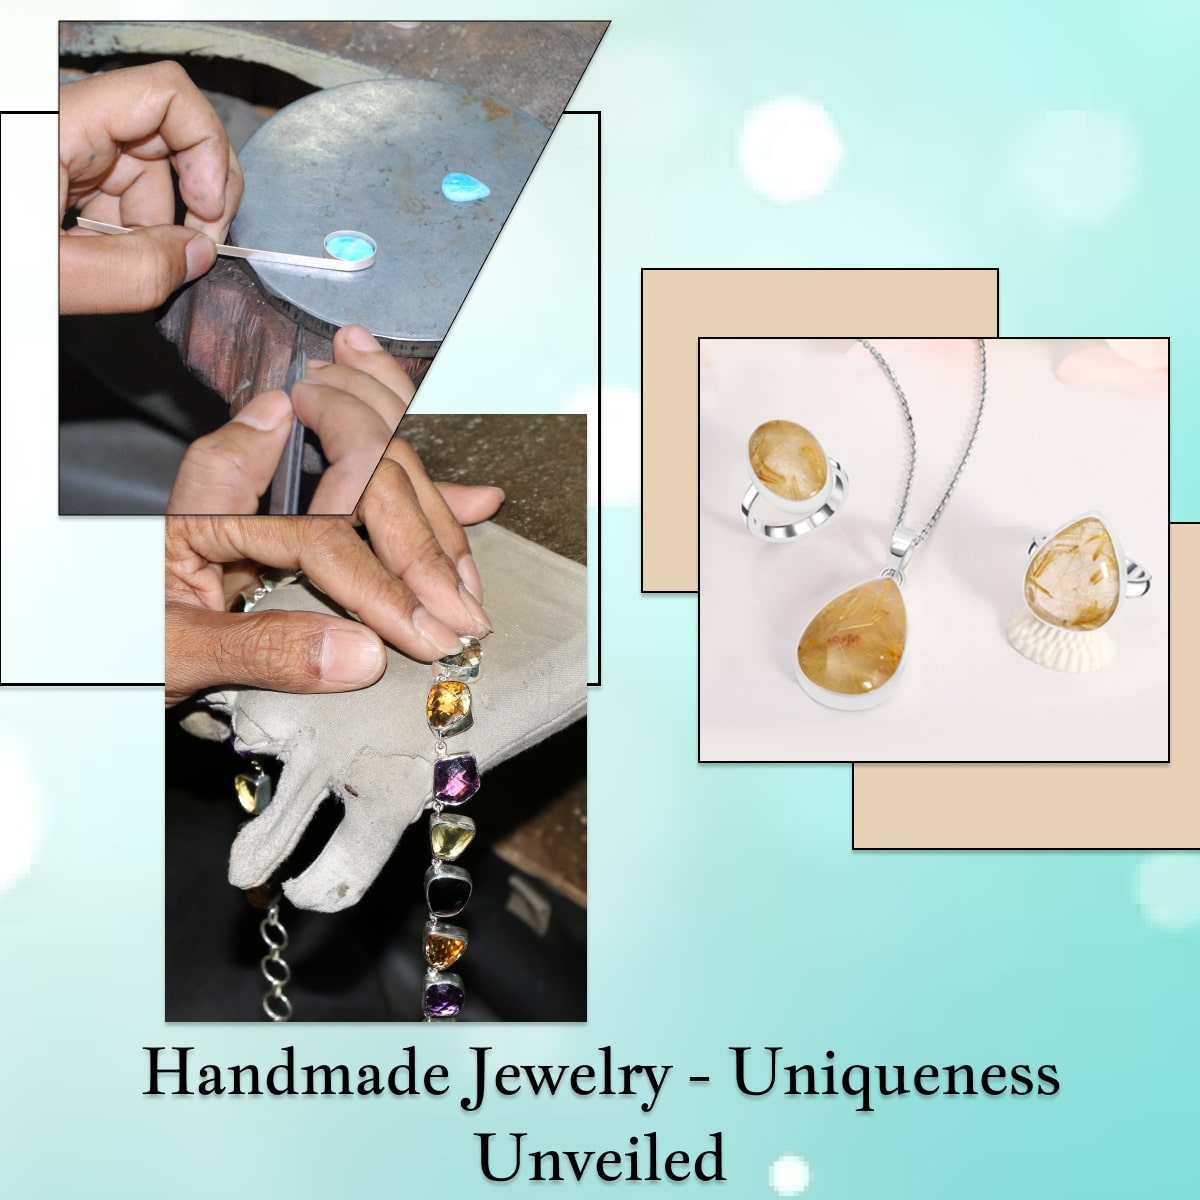 Things that Make Handmade Jewelry Unique